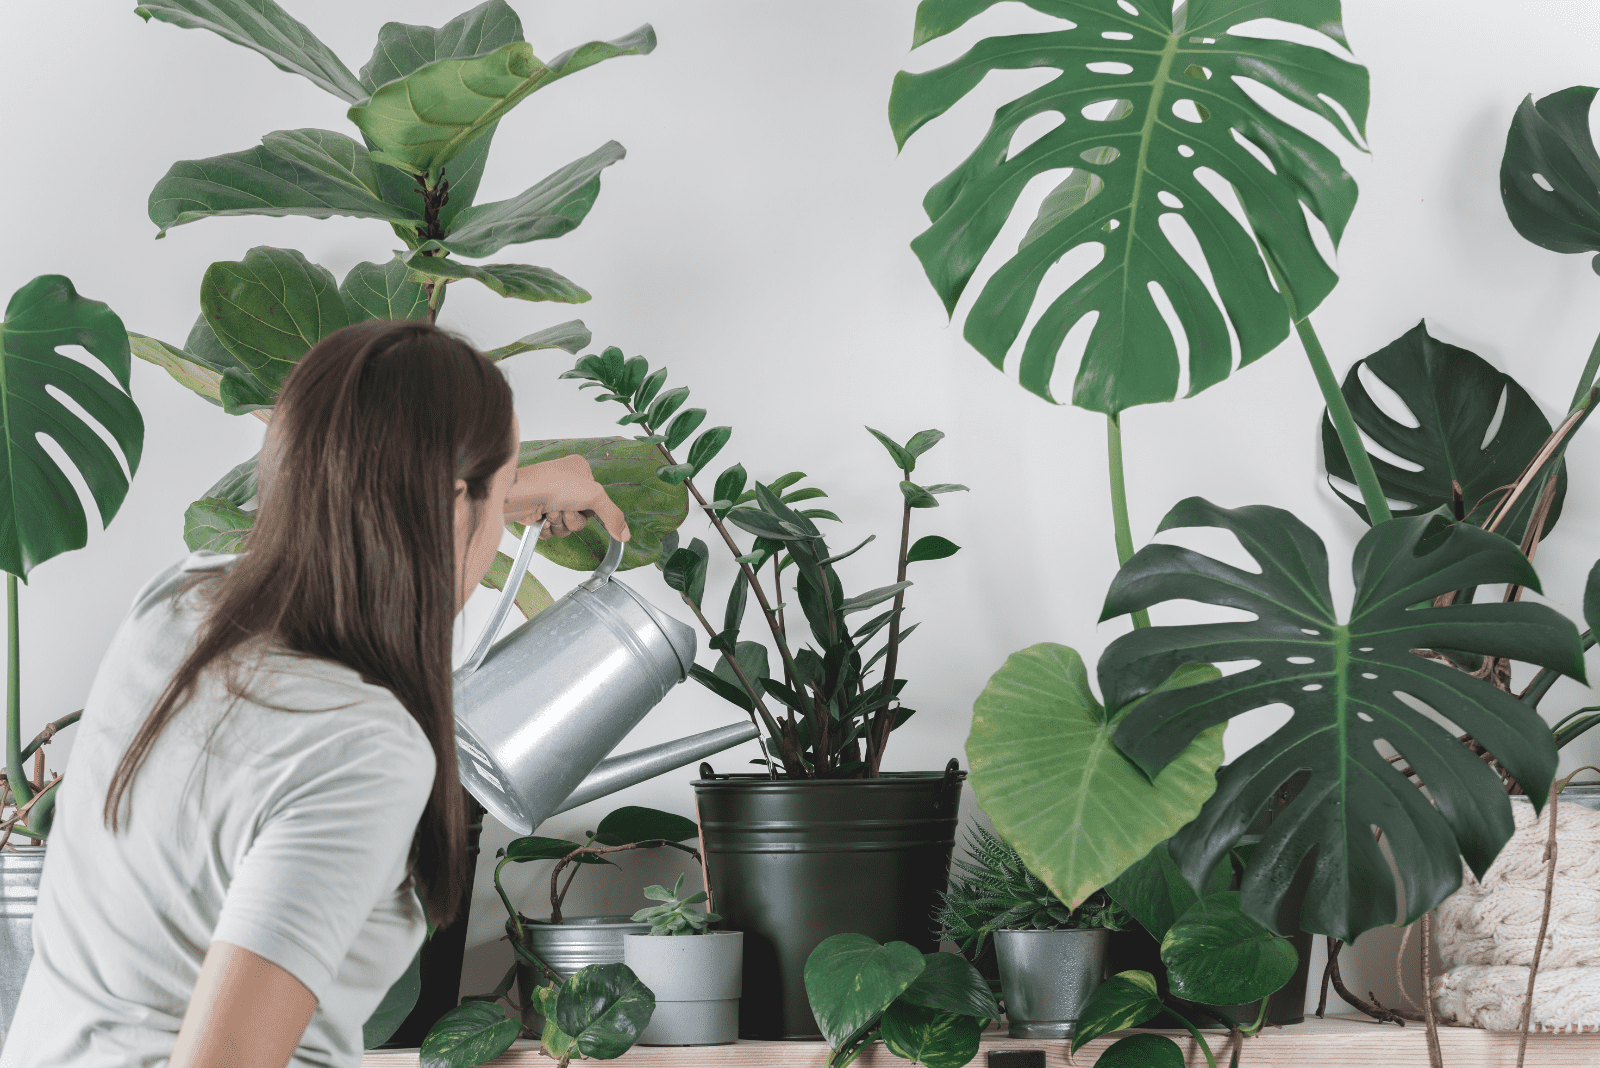 Is Watering Plants With Tea Such A Good Idea? Find Out Here!